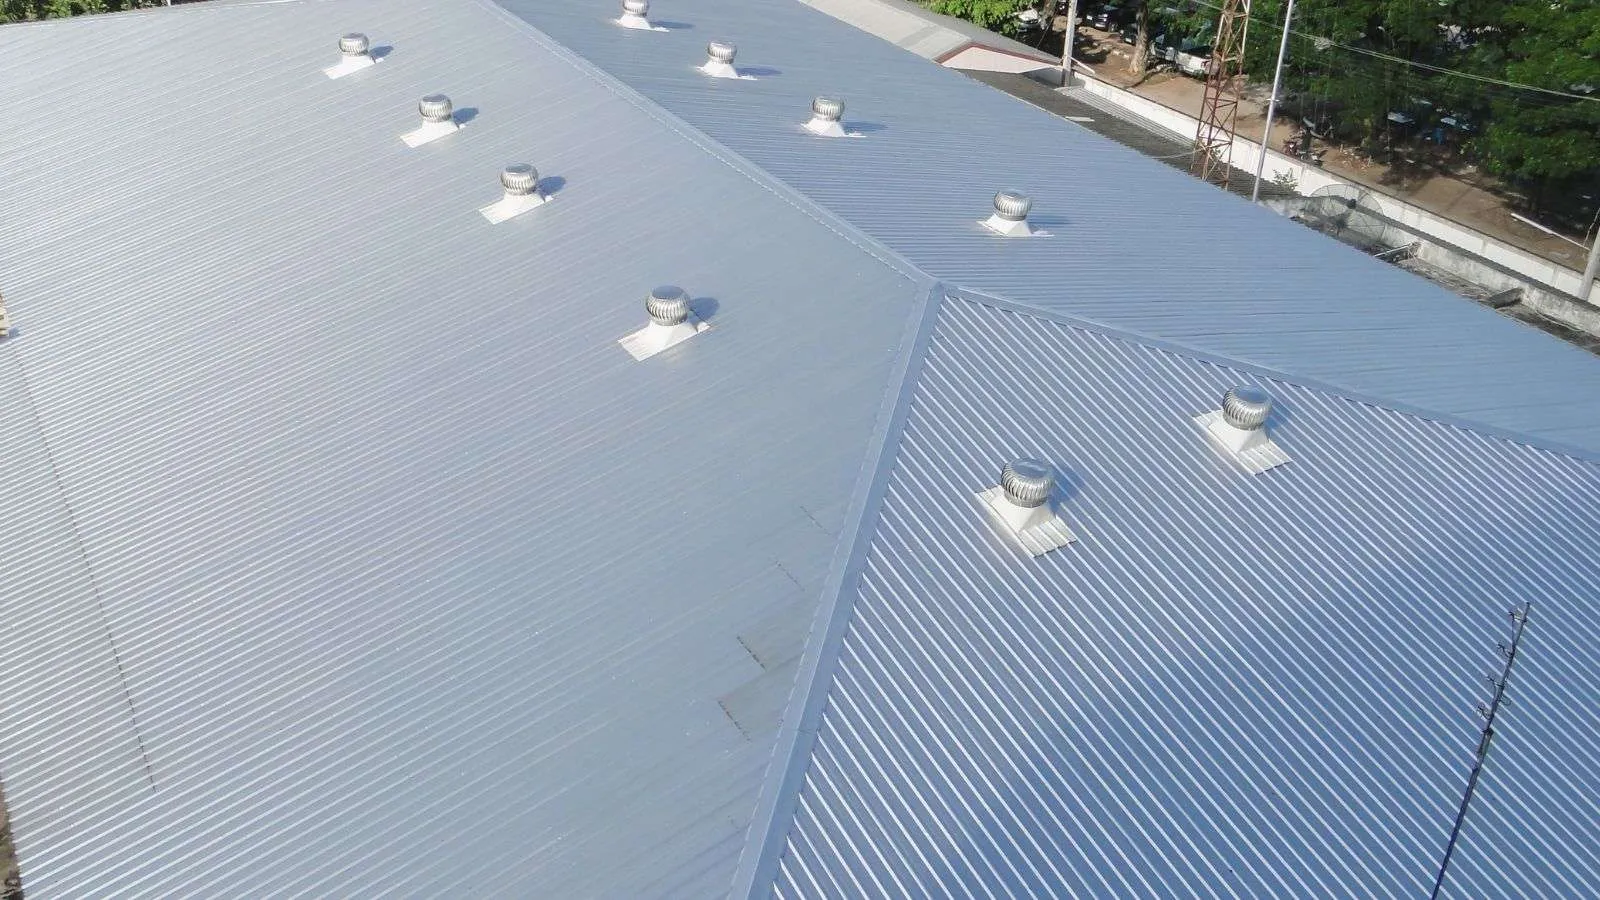 Aluminum roofing in Texas - bighomeprojects.com